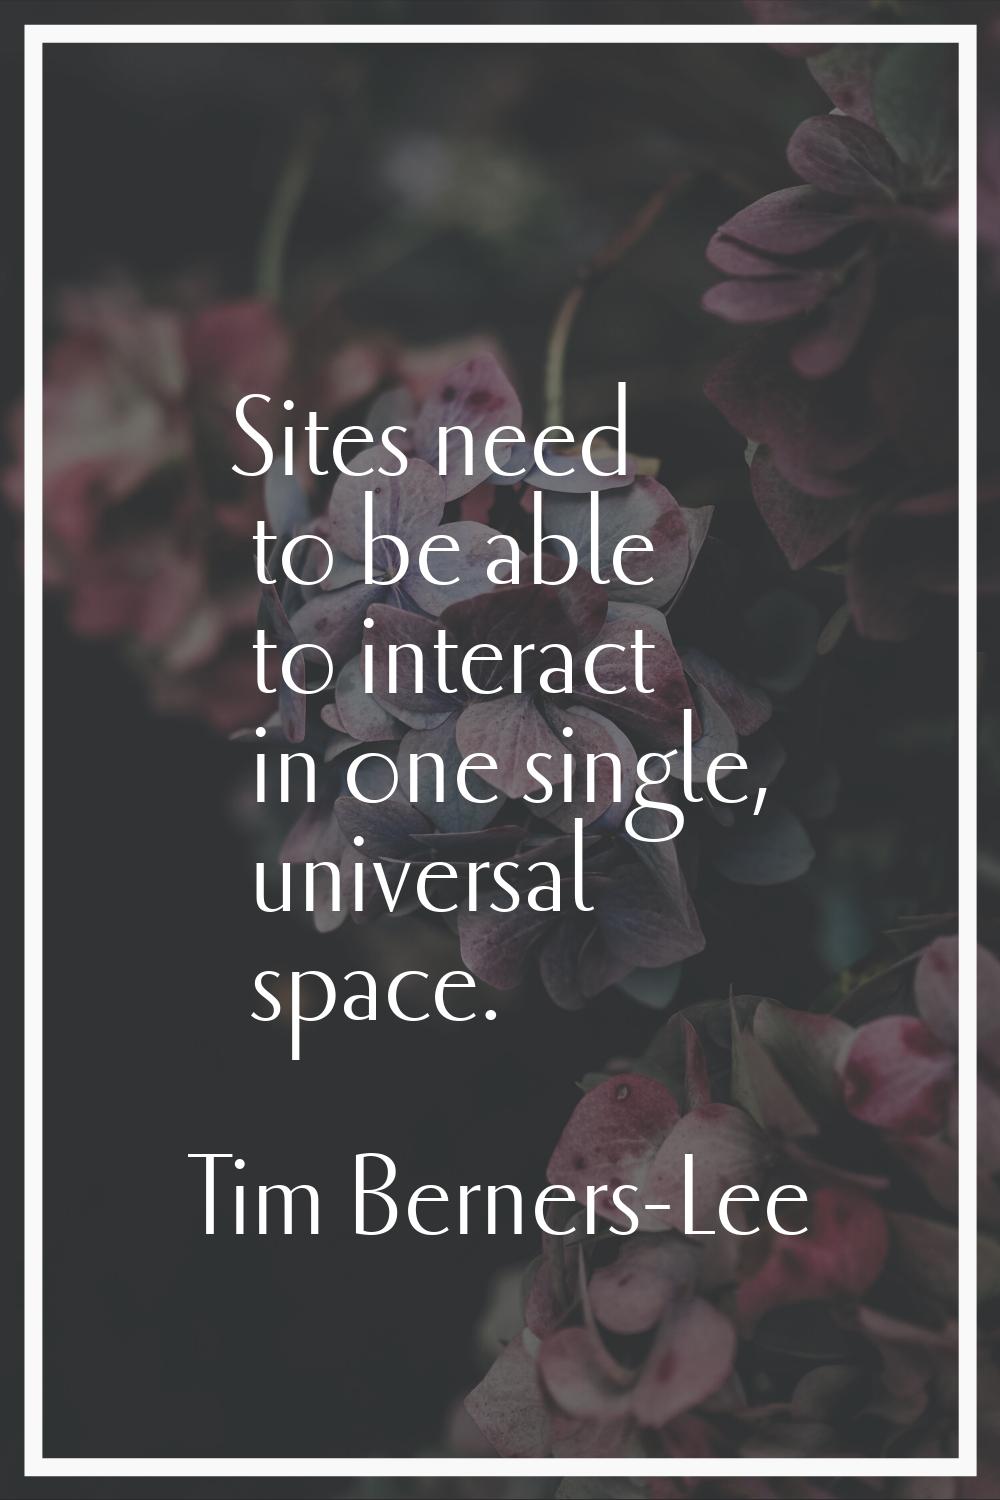 Sites need to be able to interact in one single, universal space.